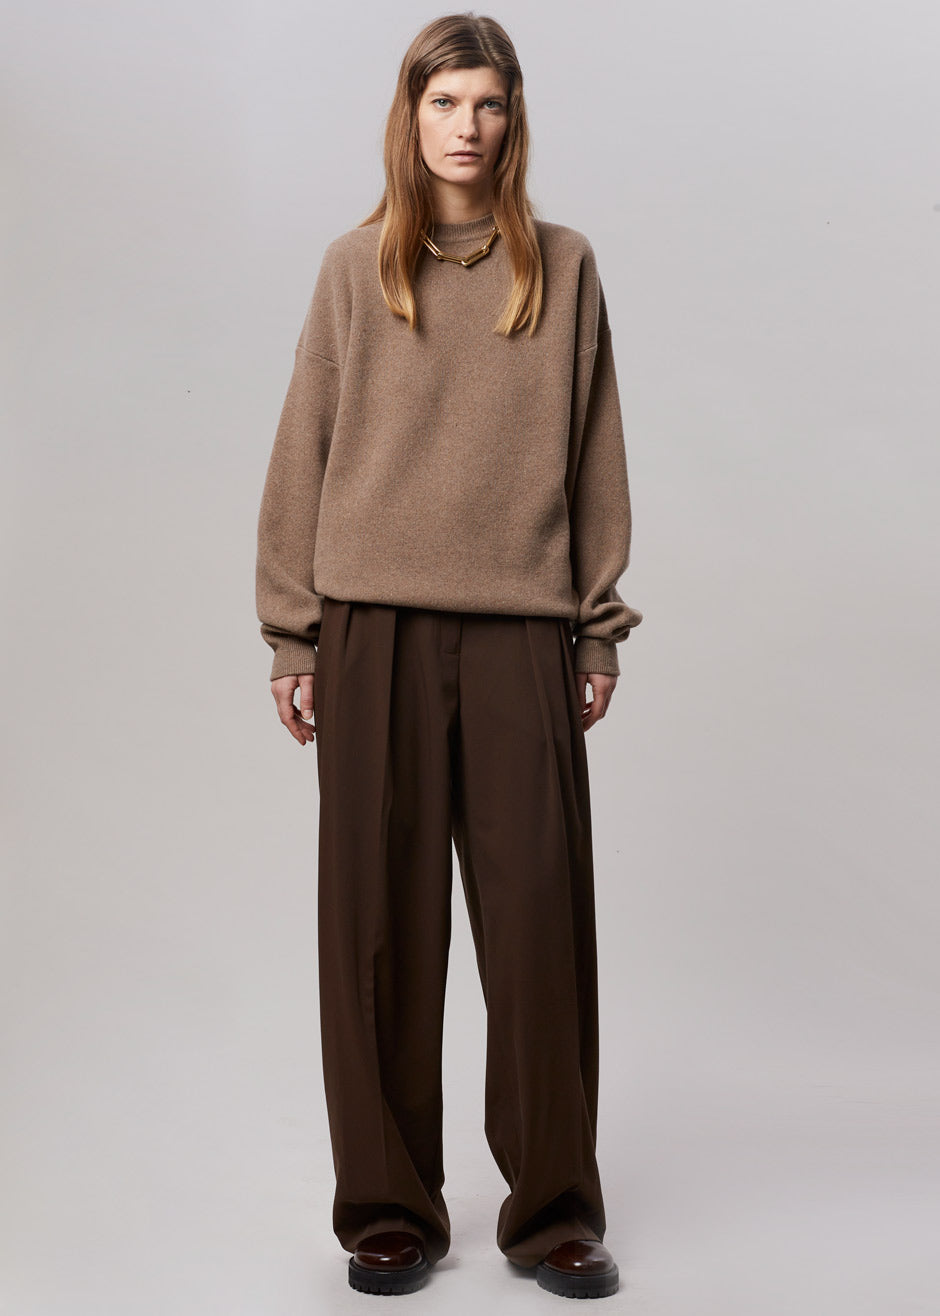 Tansy Pleated Trousers - Chocolate - 9